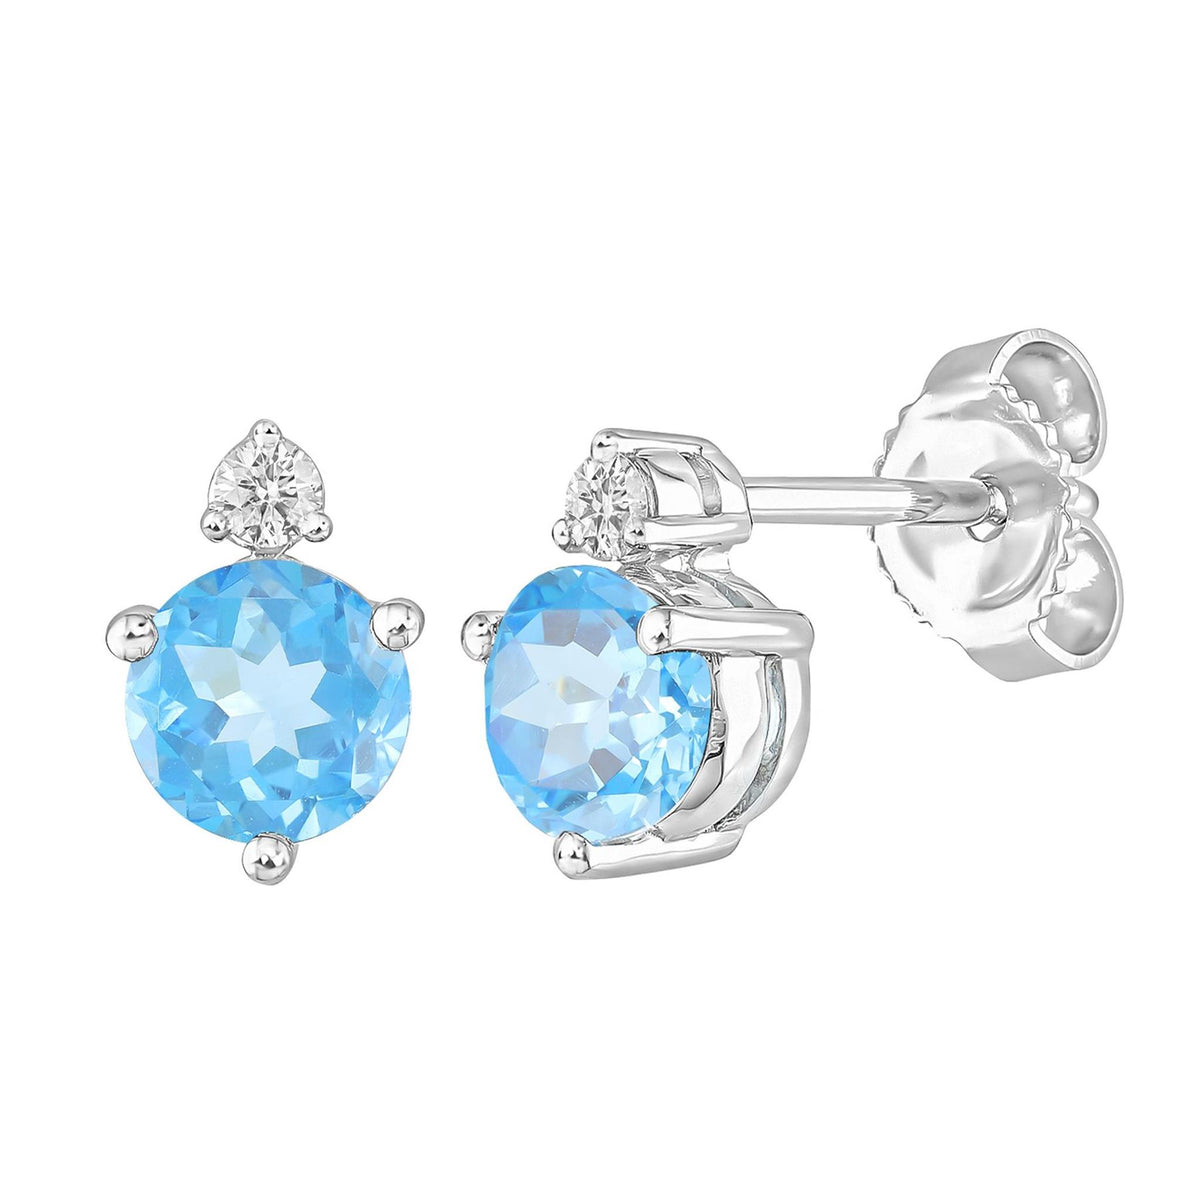 14Kt White Gold Stud Earrings With 1.17ct Blue Topaz